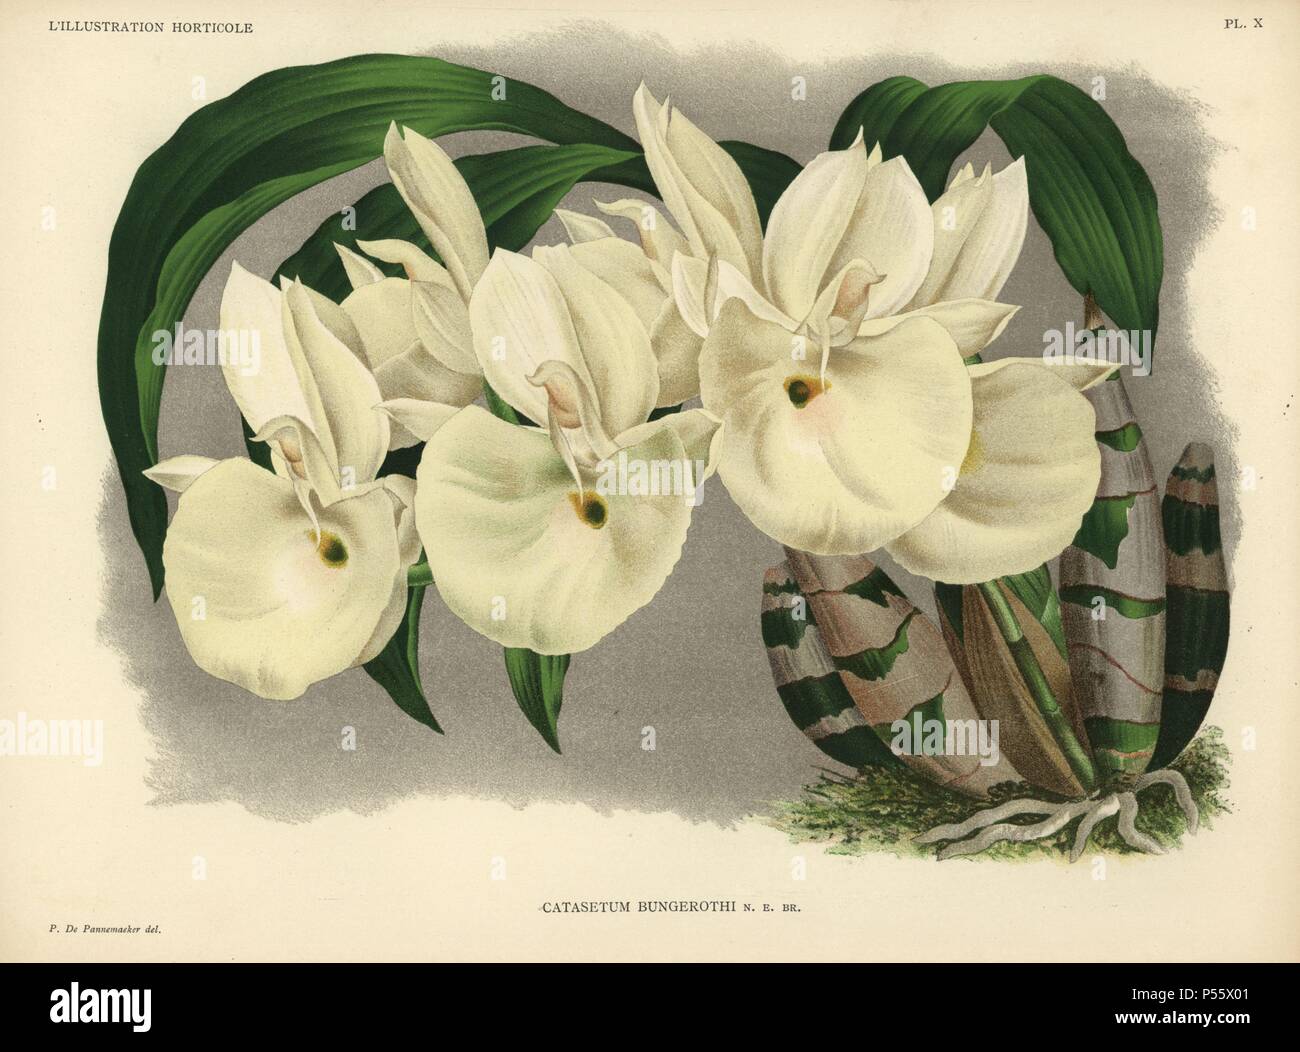 Felt-capped Catasetum or Mother of Pearl Flower . Catasetum pileatum (Catasetum bungerothii). Catasetum orchid with creamy yellow flowers. It caused 'quite a sensation' when it was first shown in London in 1886.. . Chromolithograph drawn by P. de Pannemaeker, for Jean Linden's 'L'Illustration Horticole' published in Ghent in 1886. Jean Linden (1817-1898) was a Belgian explorer, horticulturist, scientist and publisher of botanical books. Stock Photo